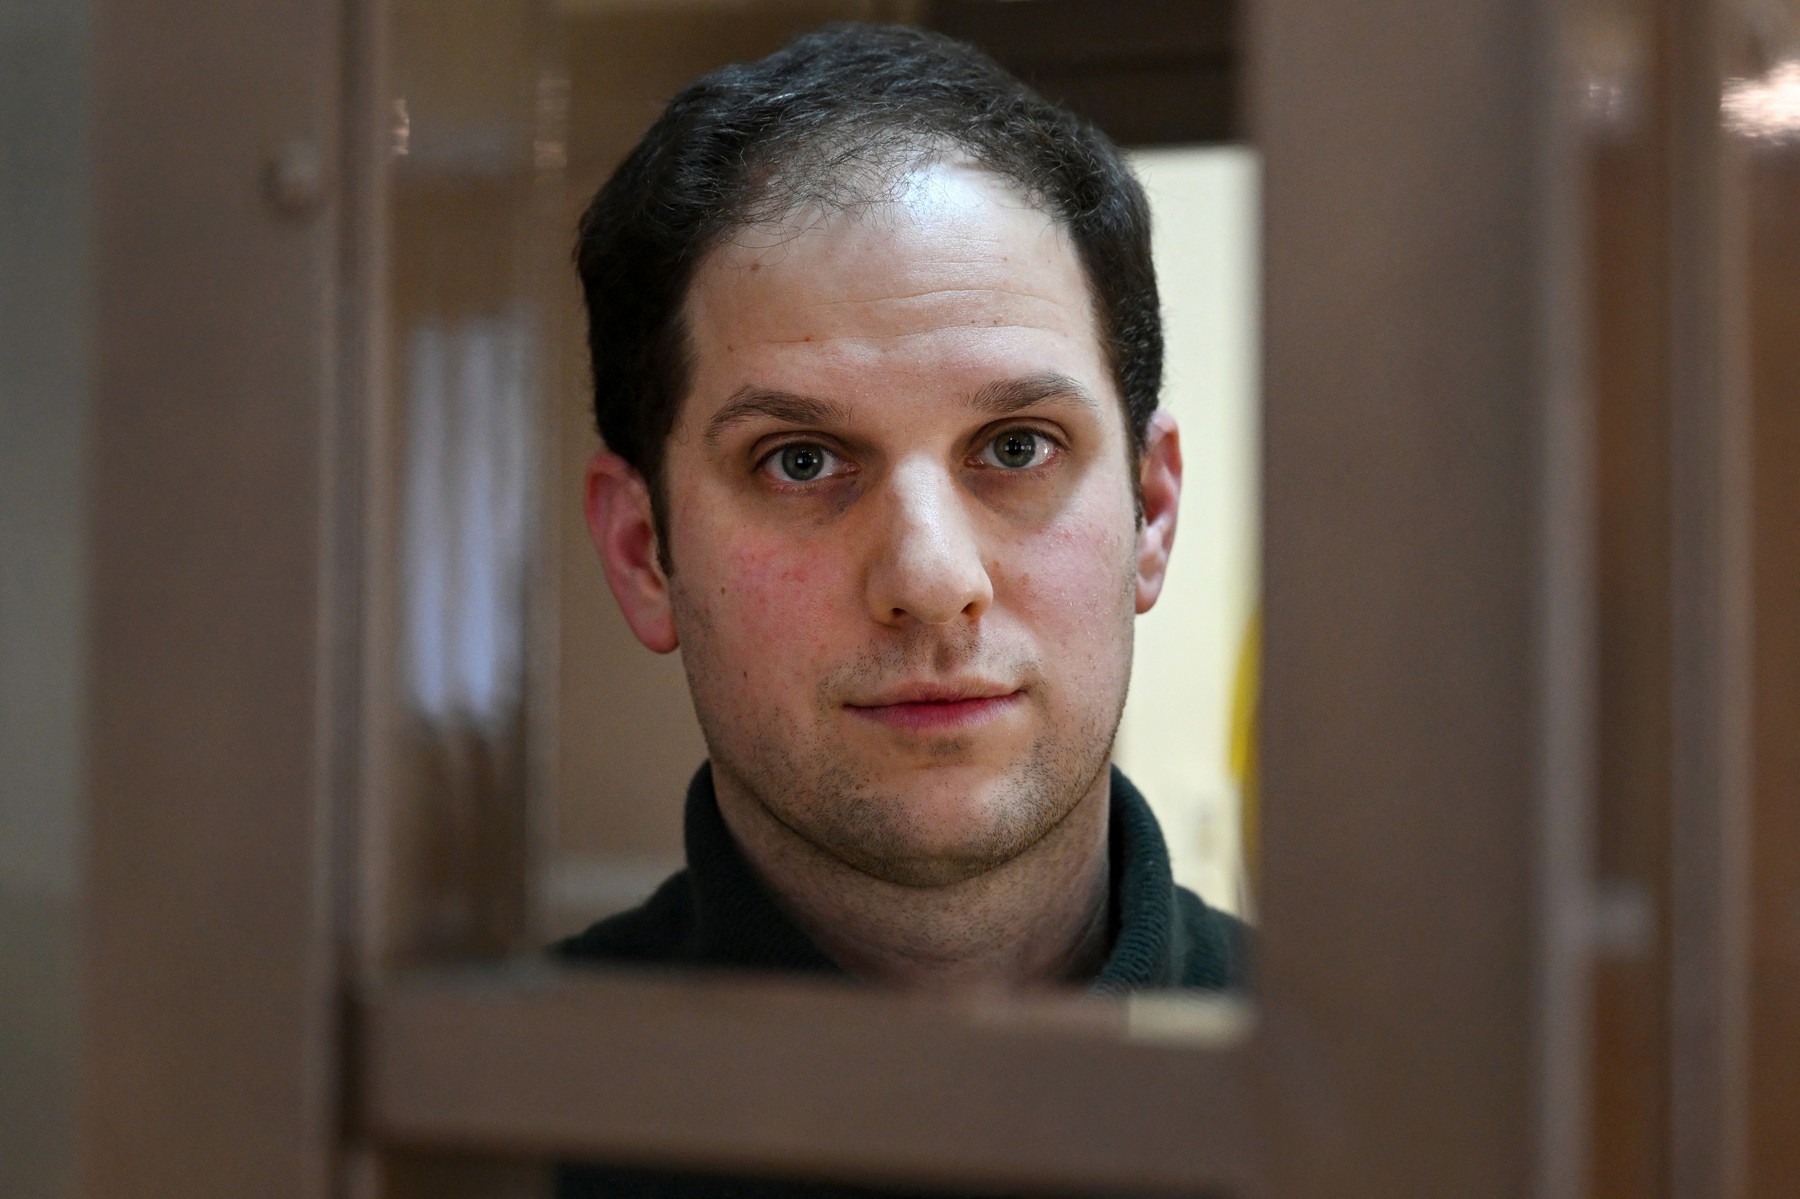 US journalist Evan Gershkovich, arrested on espionage charges, looks out from inside a defendants' cage before a hearing to consider an appeal on his extended pre-trial detention, at the Moscow City Court in Moscow on February 20, 2024. Wall Street Journal reporter Evan Gershkovich was detained last March on spying charges during a reporting trip to the Urals.,Image: 848592713, License: Rights-managed, Restrictions: , Model Release: no, Credit line: NATALIA KOLESNIKOVA / AFP / Profimedia